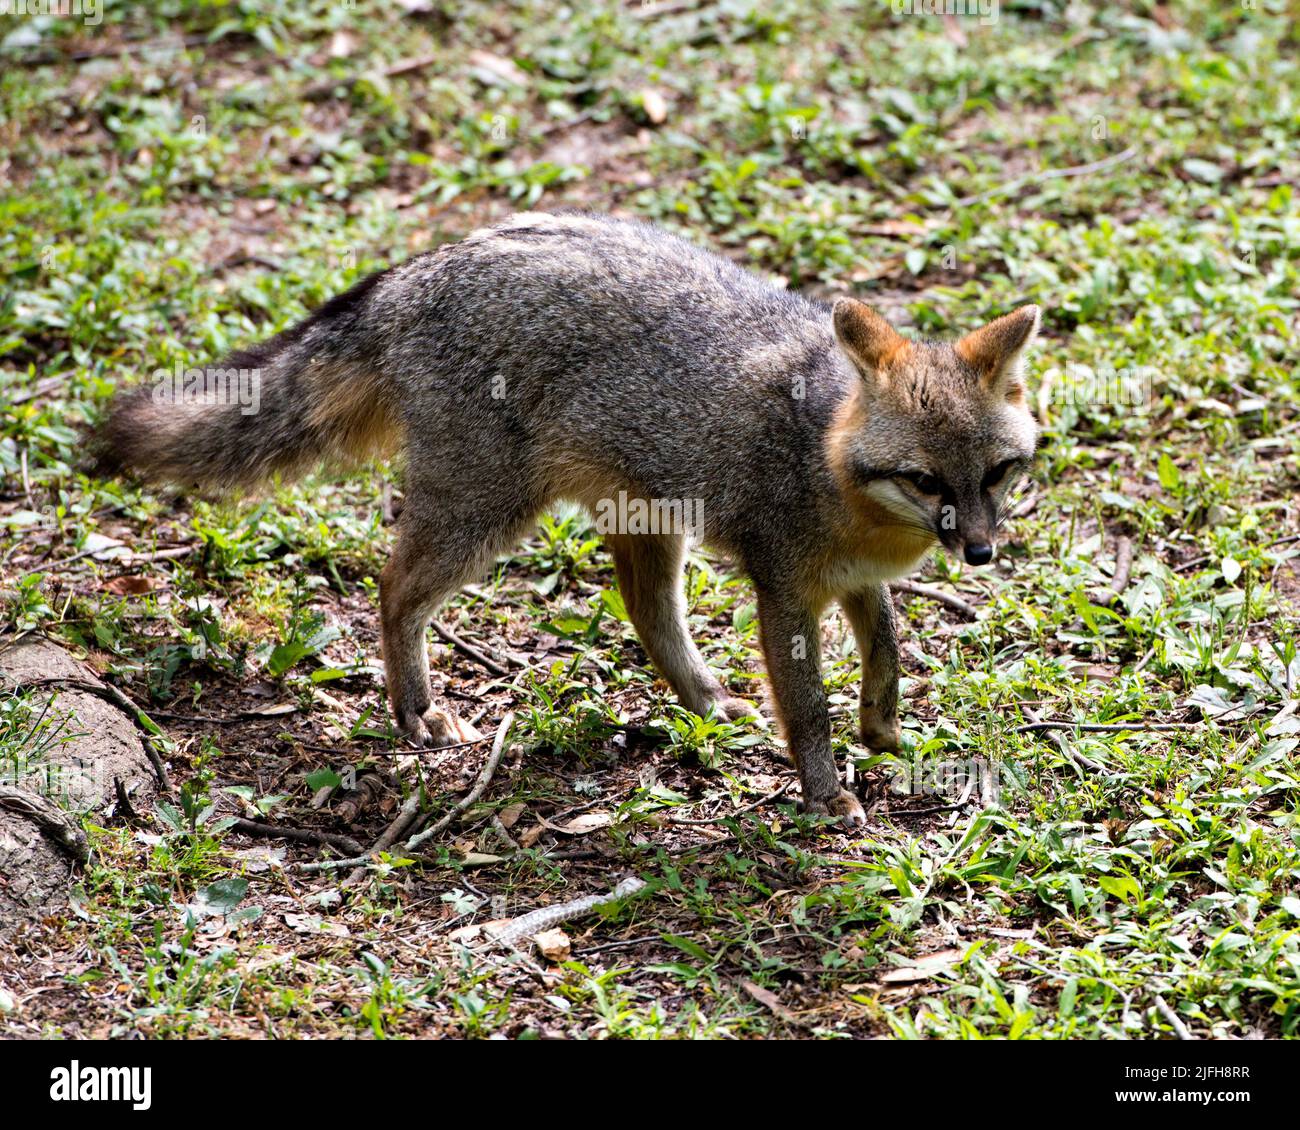 Grey fox animal walking in a field, exposing its body, head, ears, eyes, nose, tail enjoying its surrounding and environment. Stock Photo